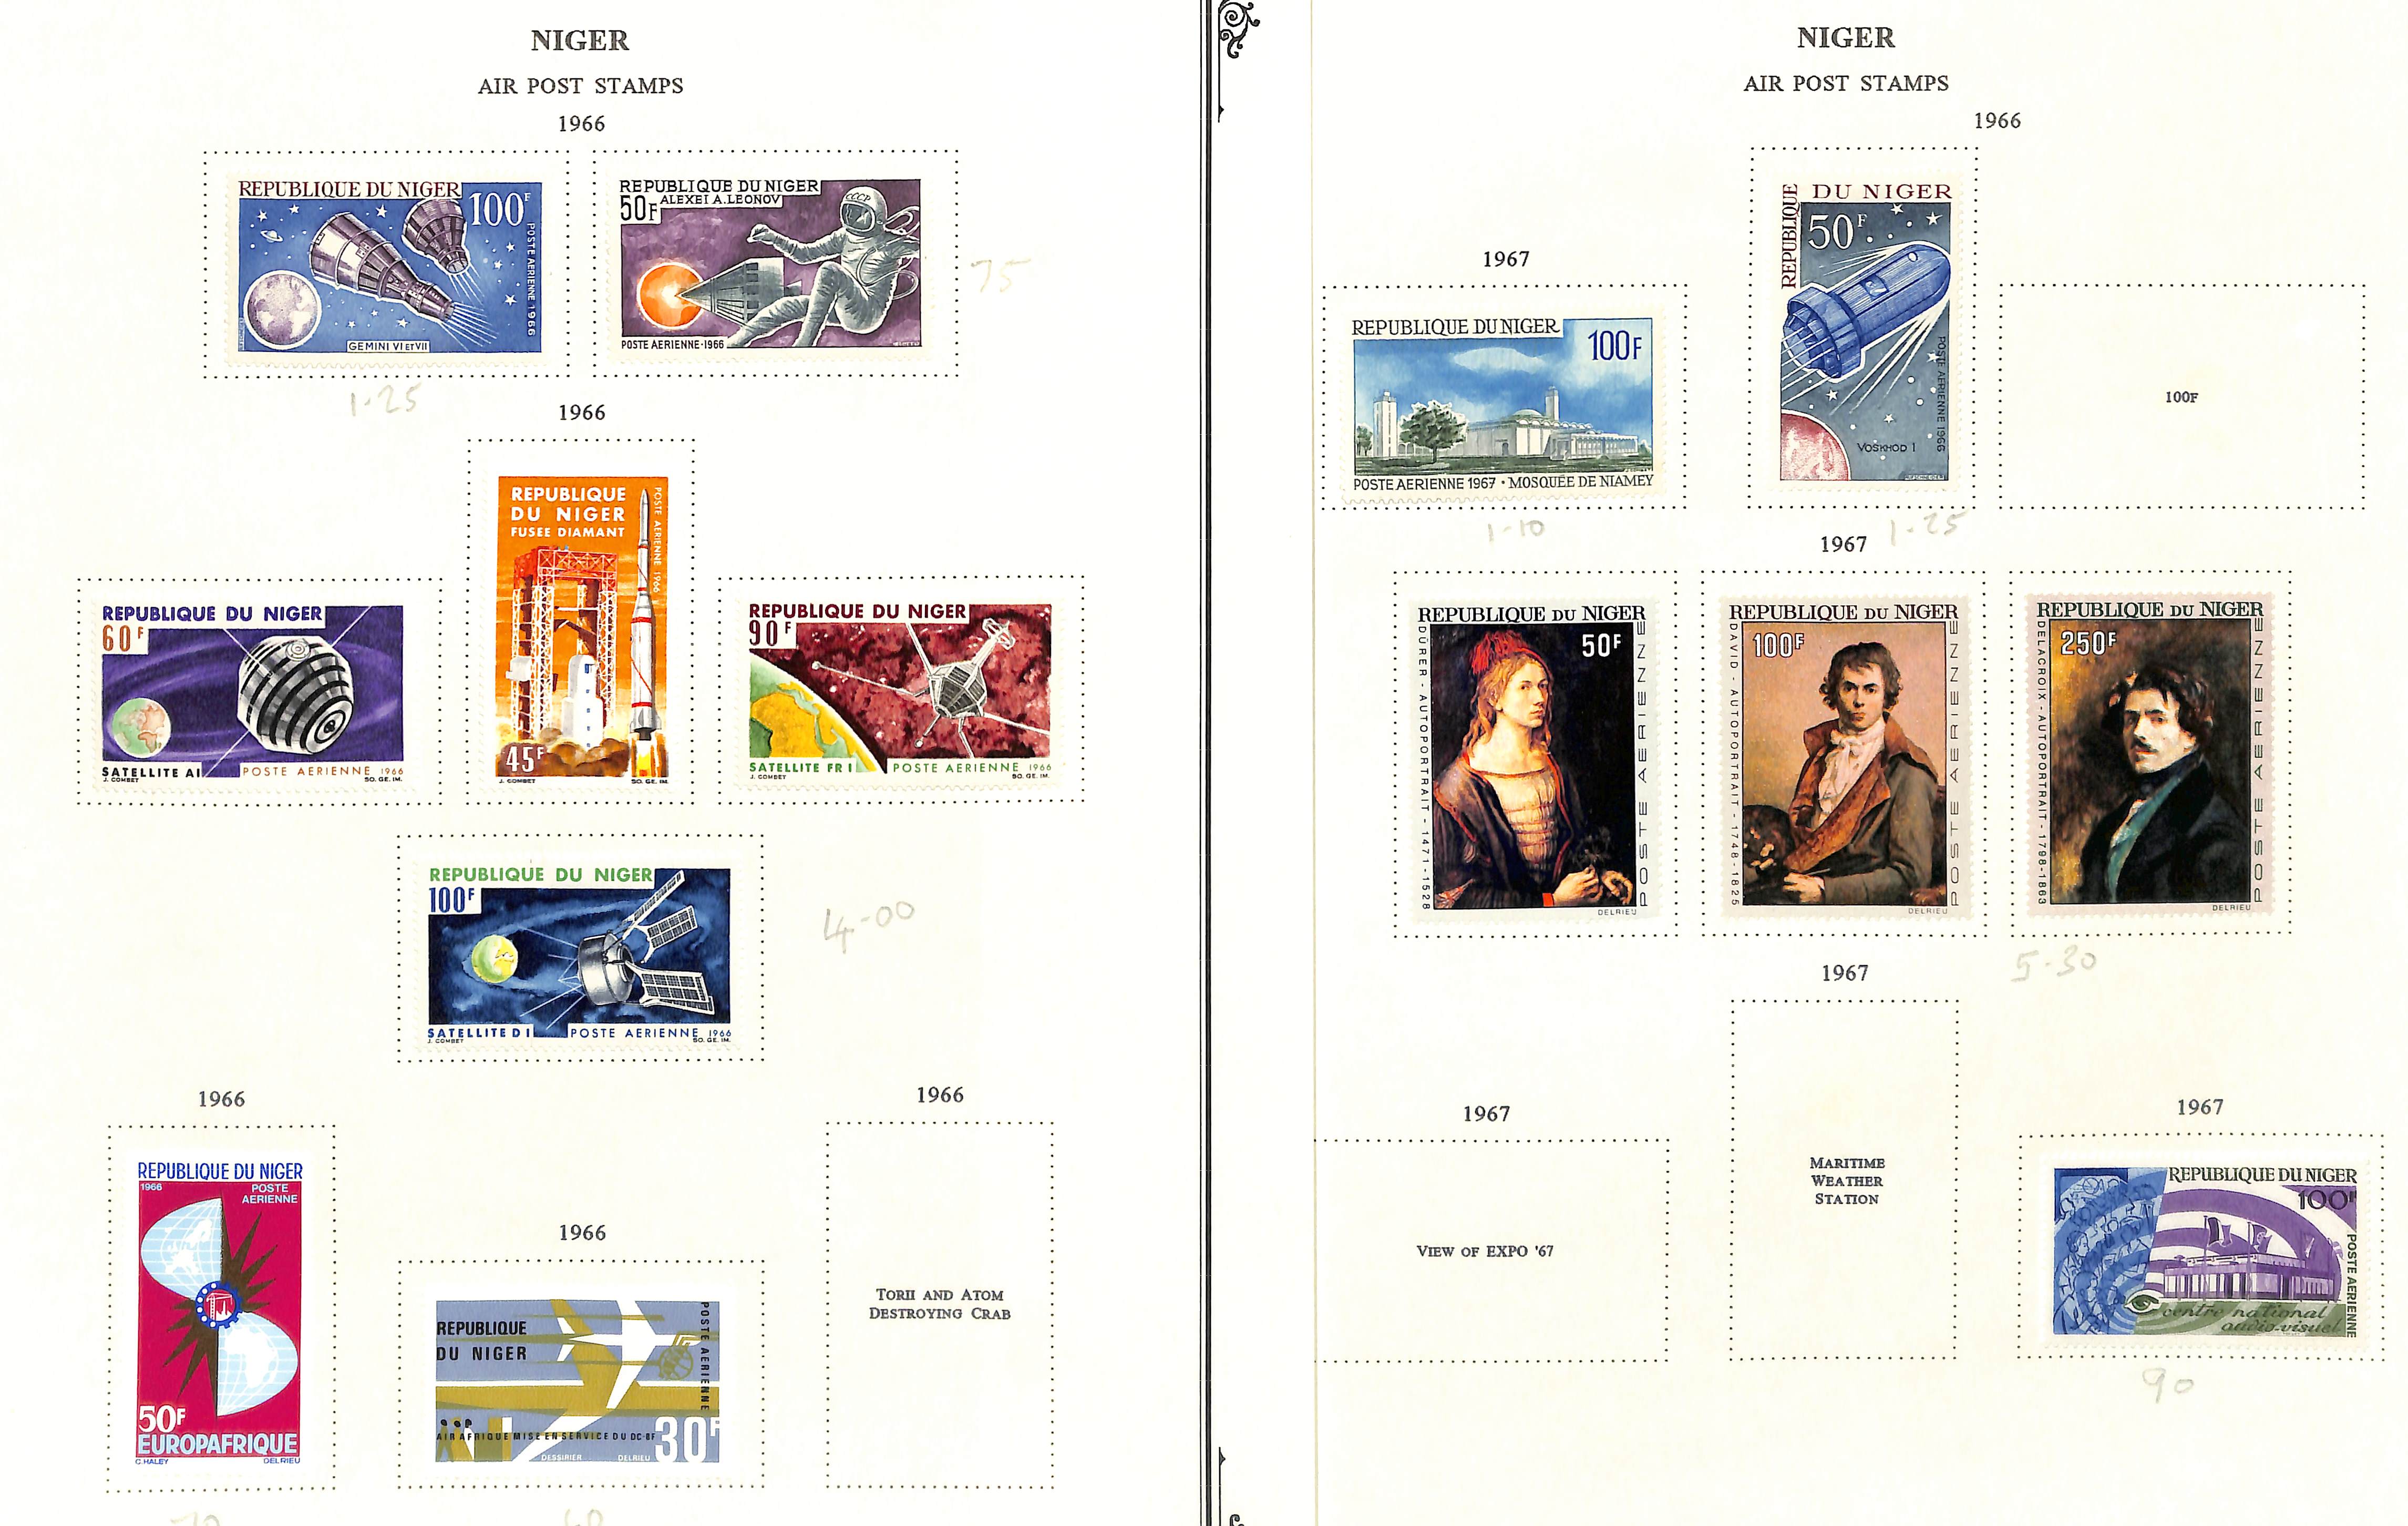 Niger. 1921 - c.1990 Mint and used collection with covers, die and plate proofs. (100s). - Image 9 of 26